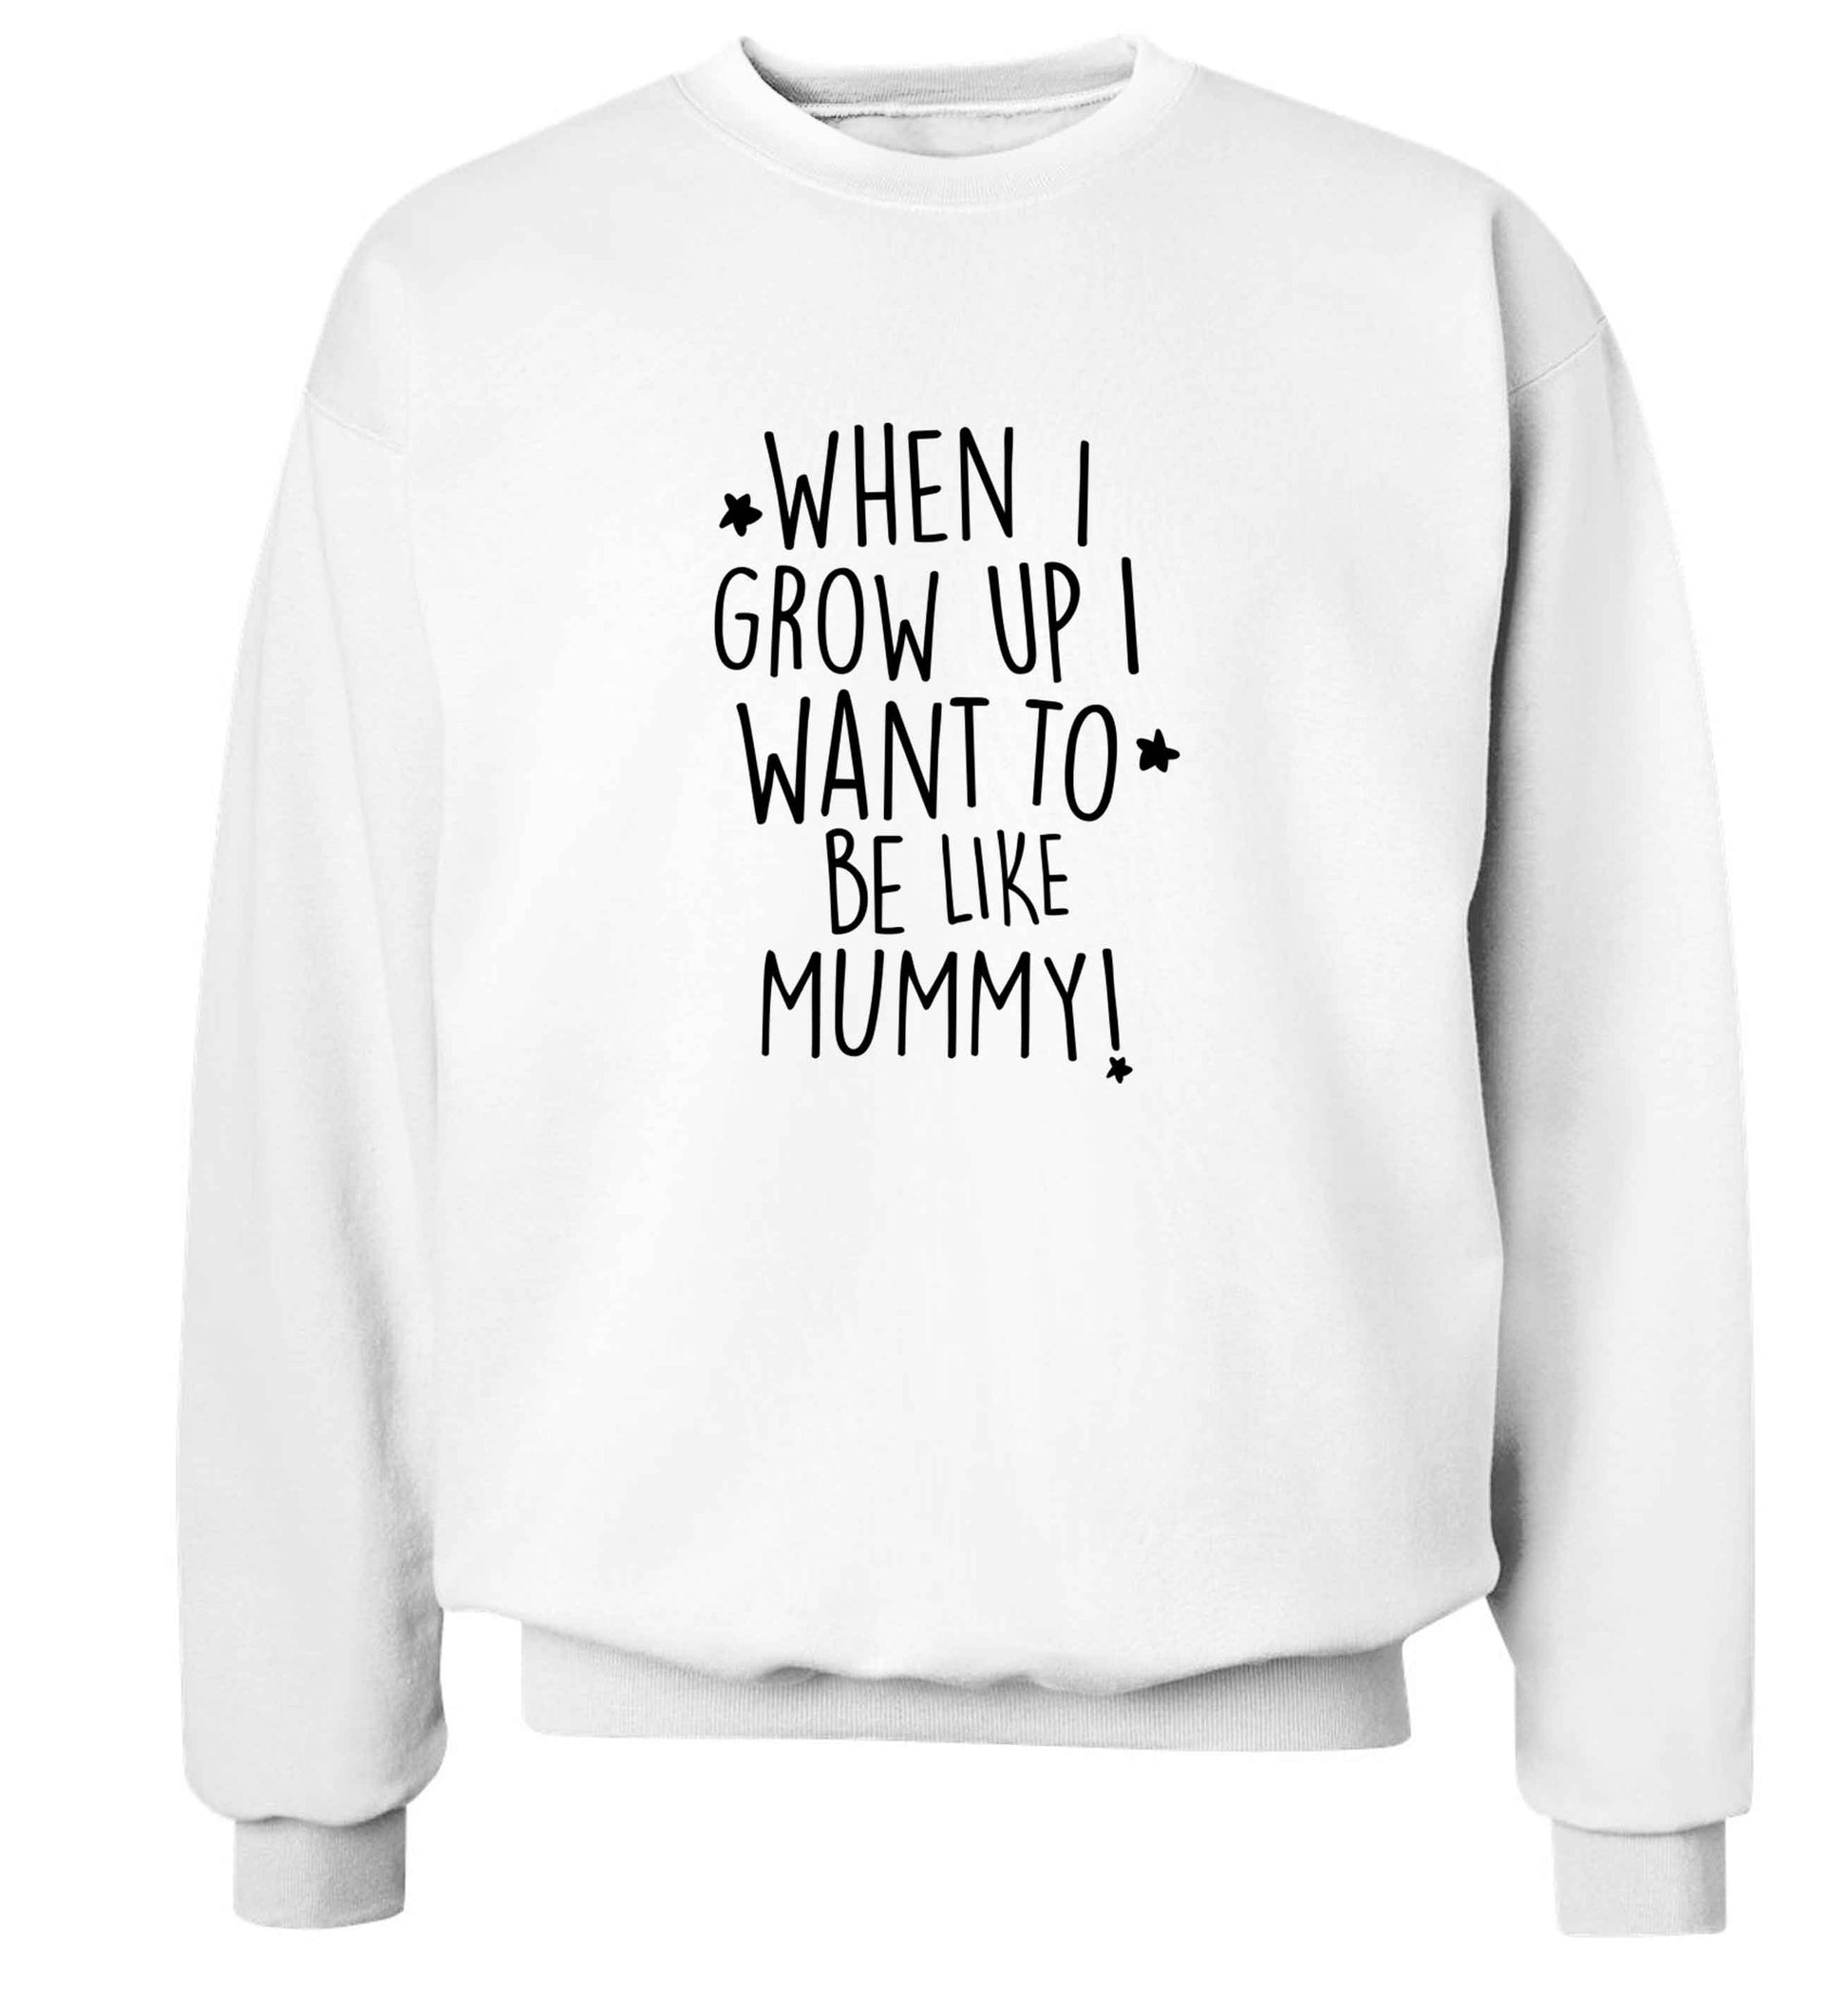 When I grow up I want to be like my mummy adult's unisex white sweater 2XL